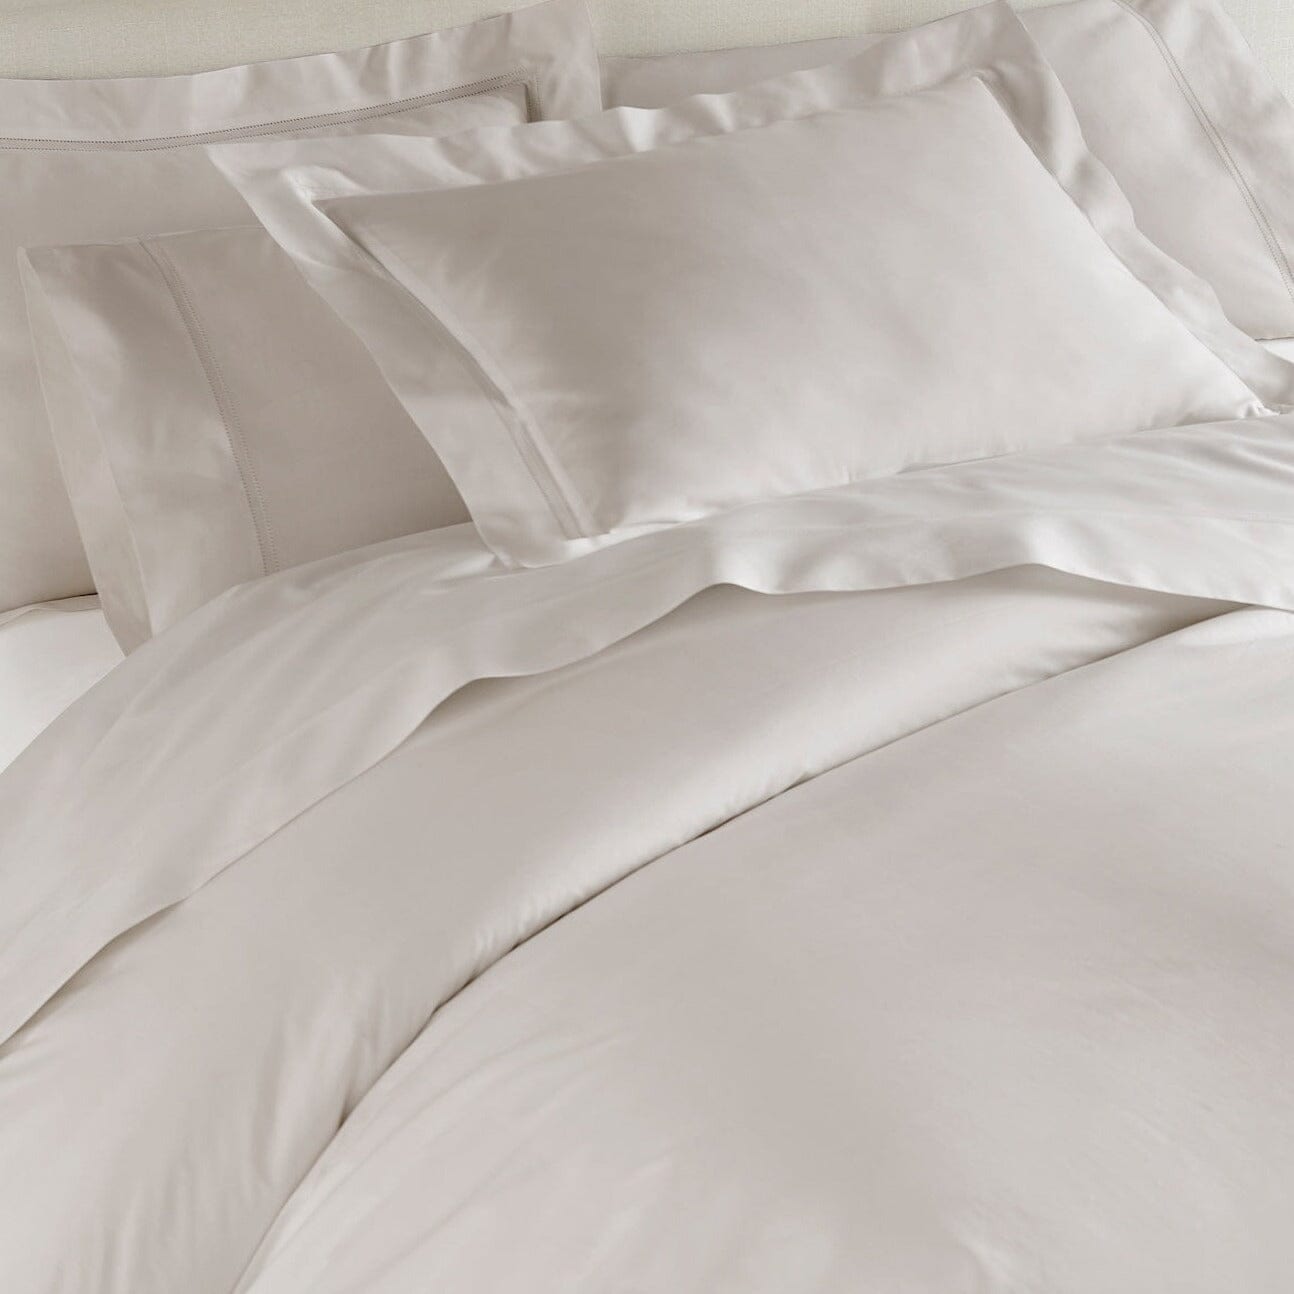 Sham and Flat Sheet - Peacock Alley Percale Cotton Bedding | Lyric Platinum at Fig Linens and Home